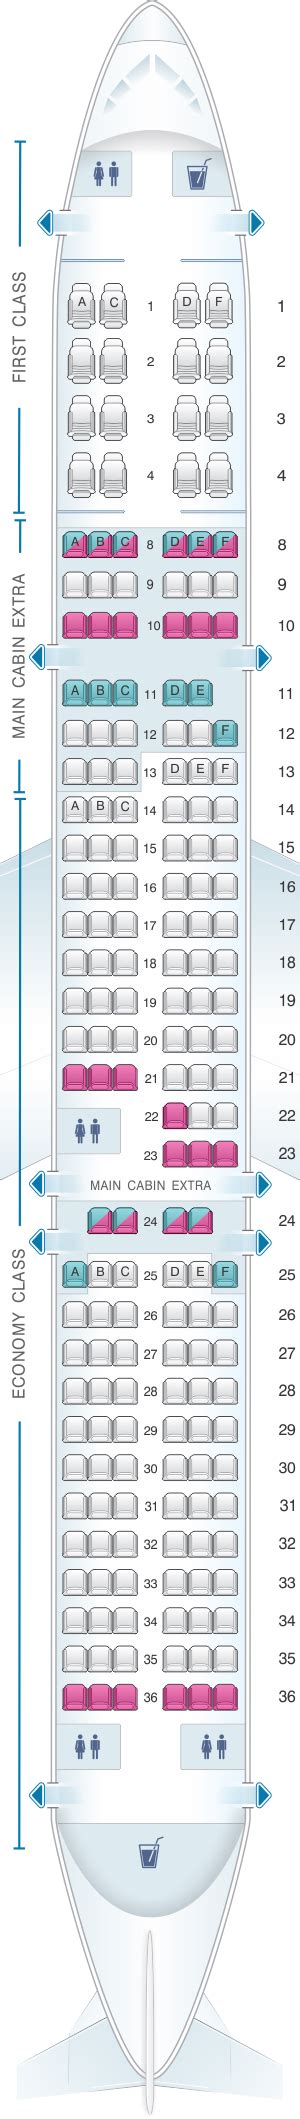 Airbus A321 Seating